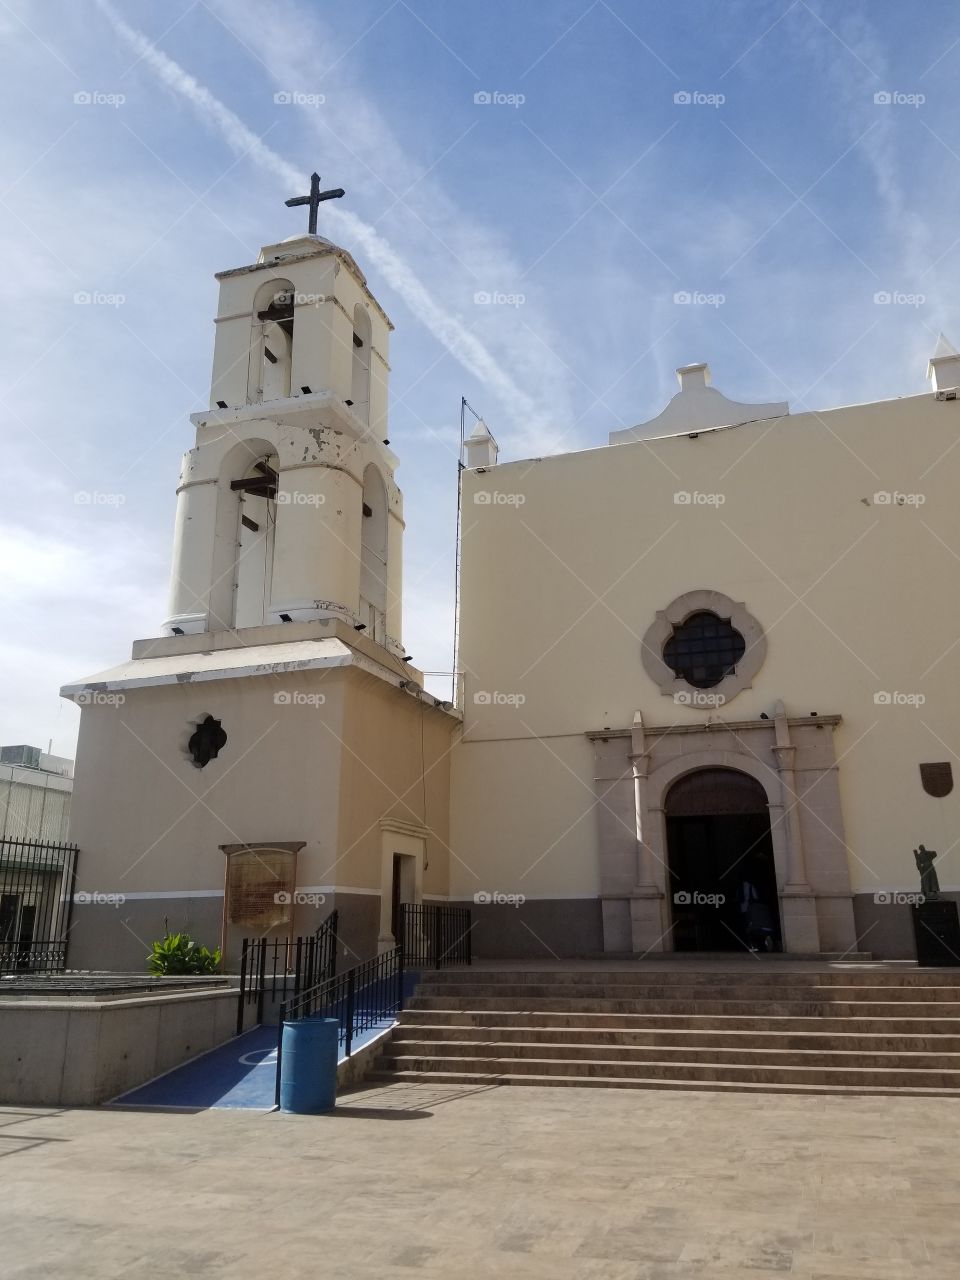 Old Church in Mexico